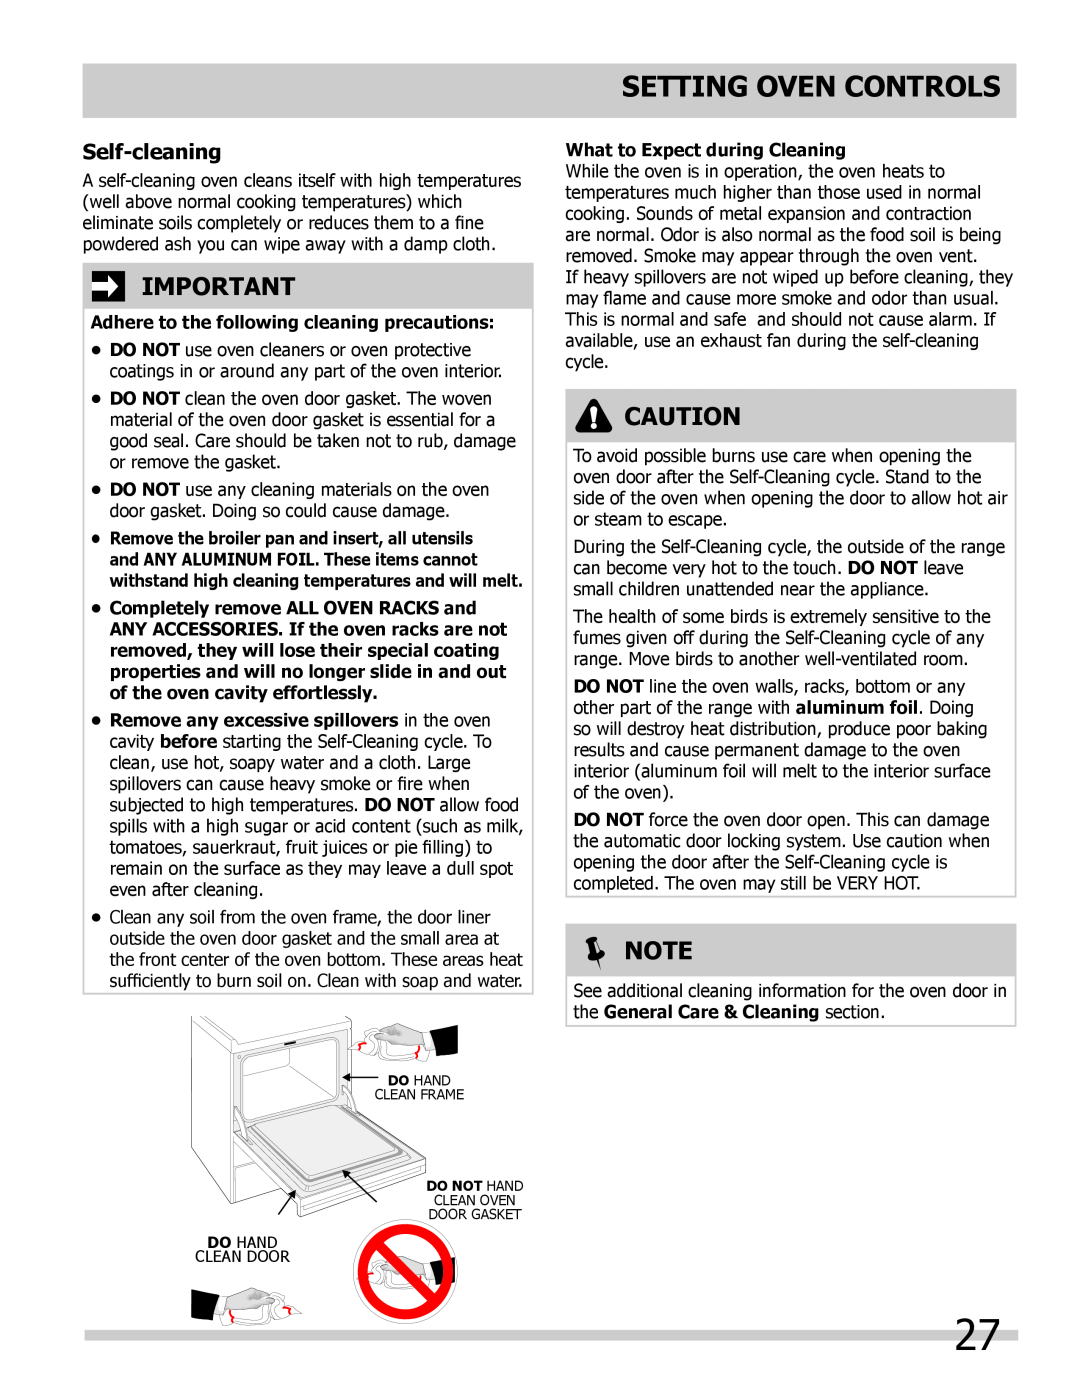 Frigidaire FGGS3045KW Self-cleaning, Adhere to the following cleaning precautions, What to Expect during Cleaning, Note 